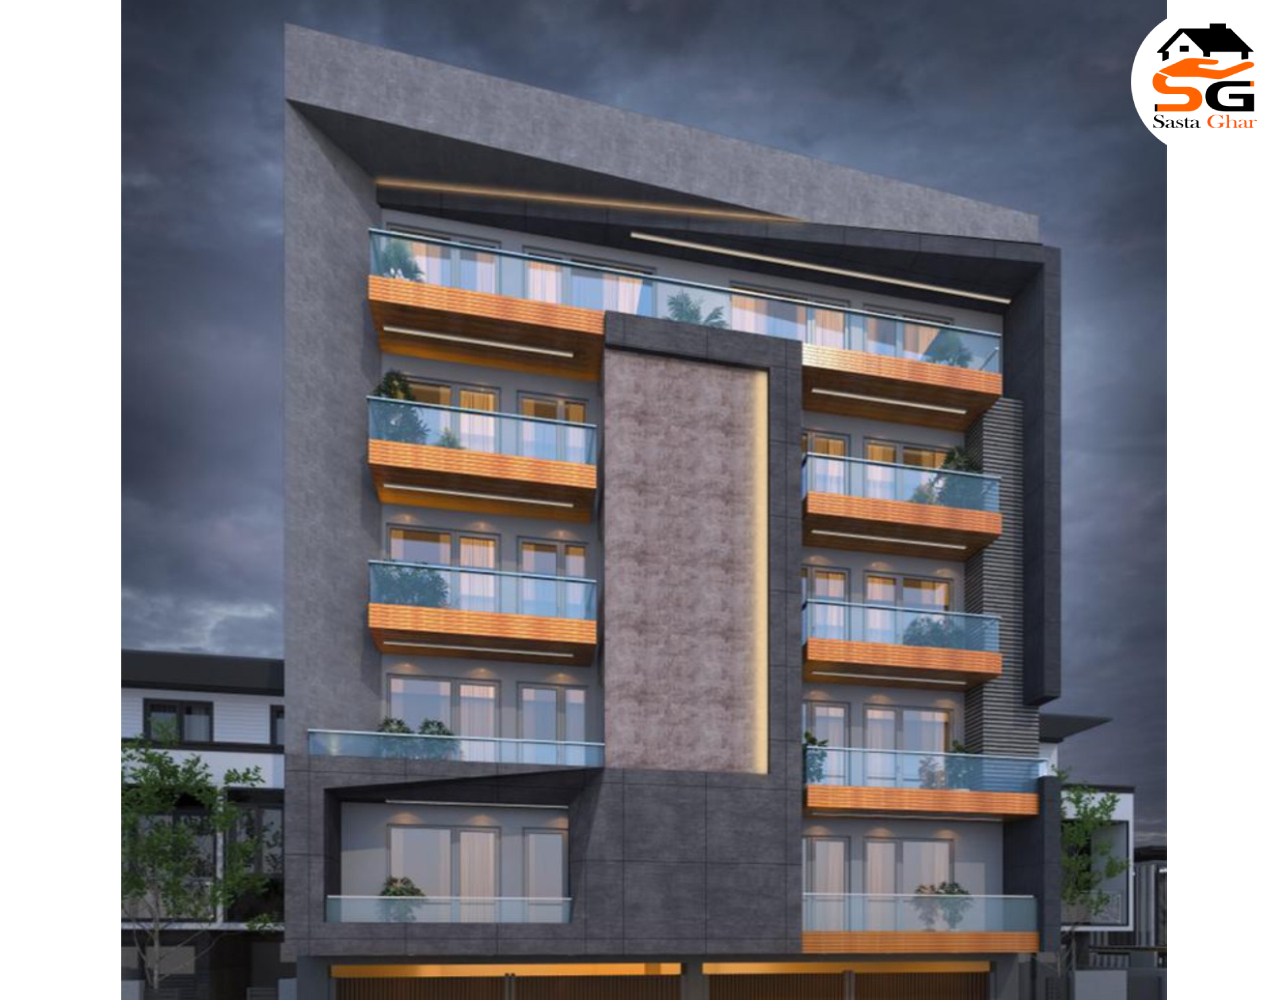 3 BHK flat in Chattarpur with bank loan